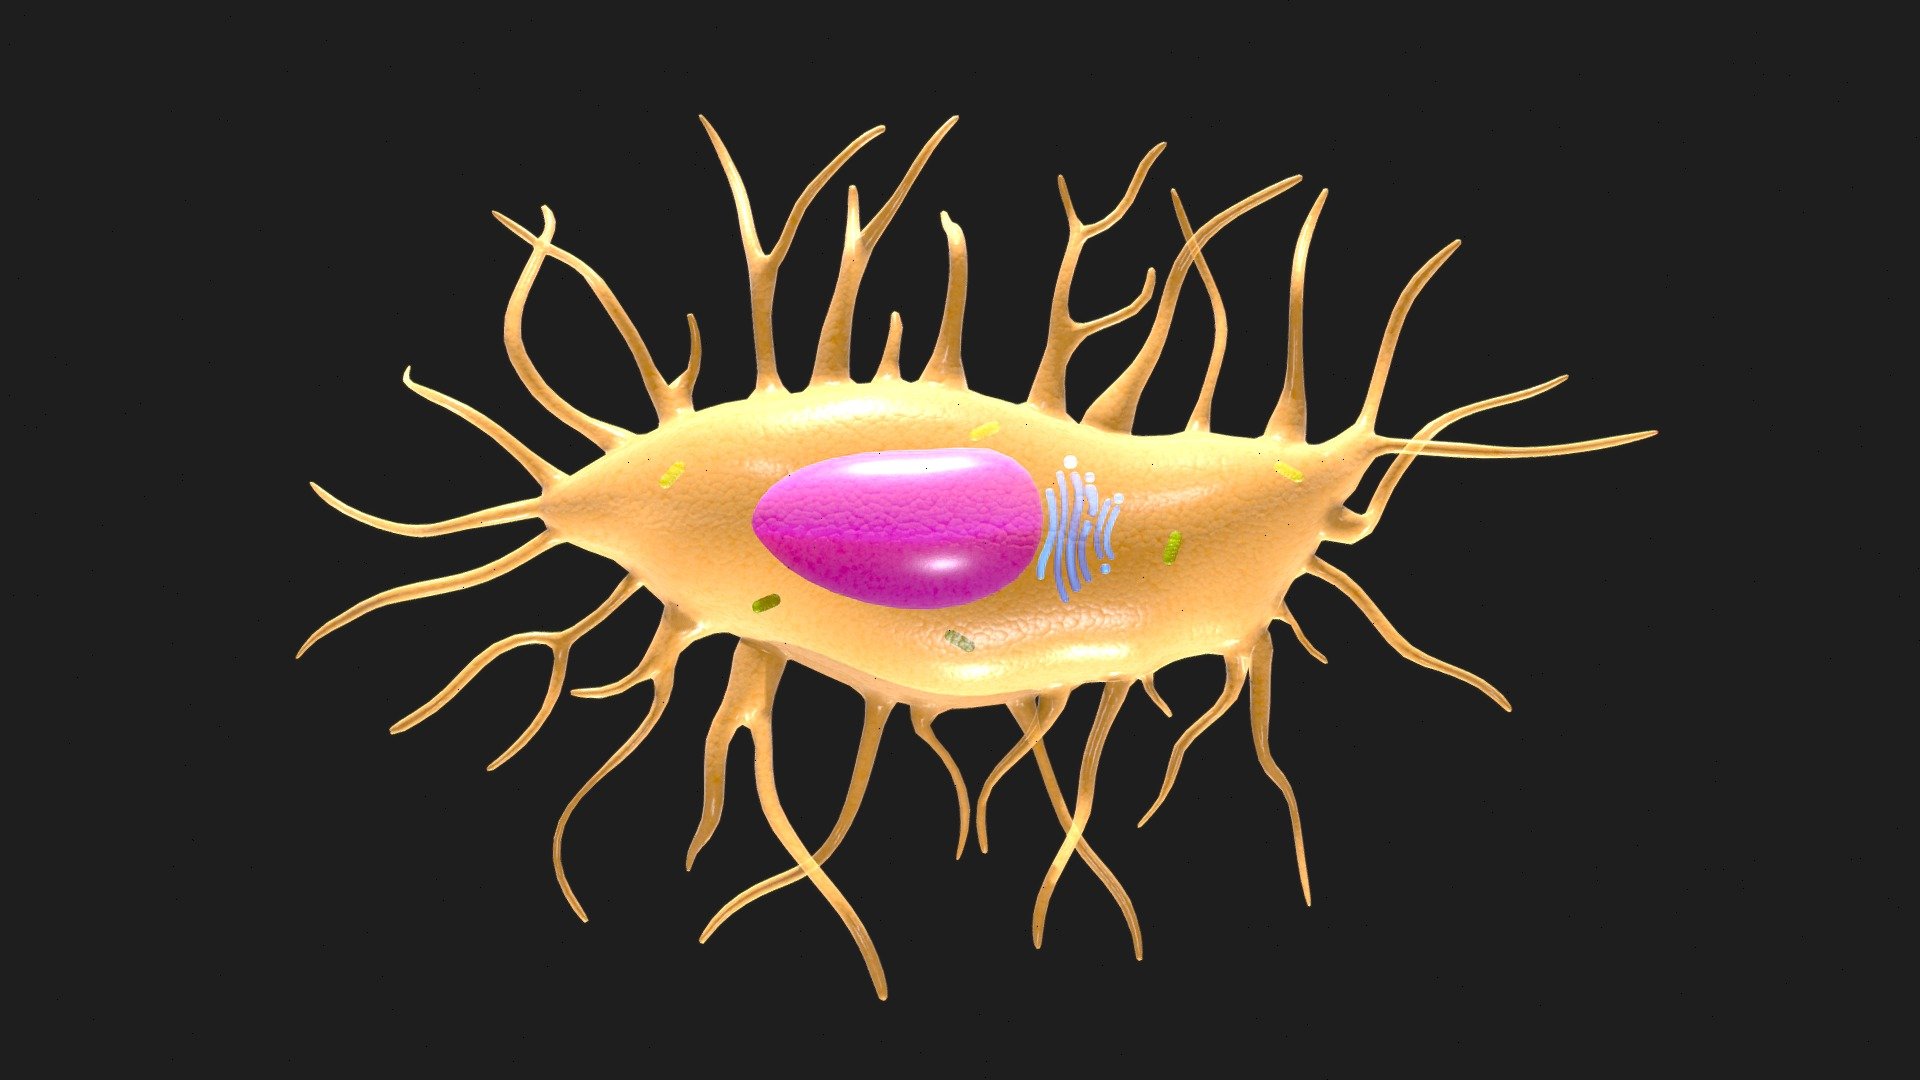 Osteocyte Bone Cell

Osteocytes are specialized bone cells embedded within the mineralized matrix of bone tissue. They play a crucial role in maintaining bone health by sensing mechanical stress and orchestrating bone remodeling processes.




Format: FBX, OBJ, MTL, STL, glb, glTF, Blender v3.6.2

Optimized UVs (Non-Overlapping UVs)

PBR Textures | 1024x1024 - 2048x2048 - 4096x4096 | (1K, 2K, 4K - Jpeg, Png)

Base Color (Albedo)

Normal Map

AO Map

Metallic Map

Roughness Map

Height Map

Opacity Map
 - Osteocyte Bone Cell - Buy Royalty Free 3D model by Nima (@h3ydari96) 3d model